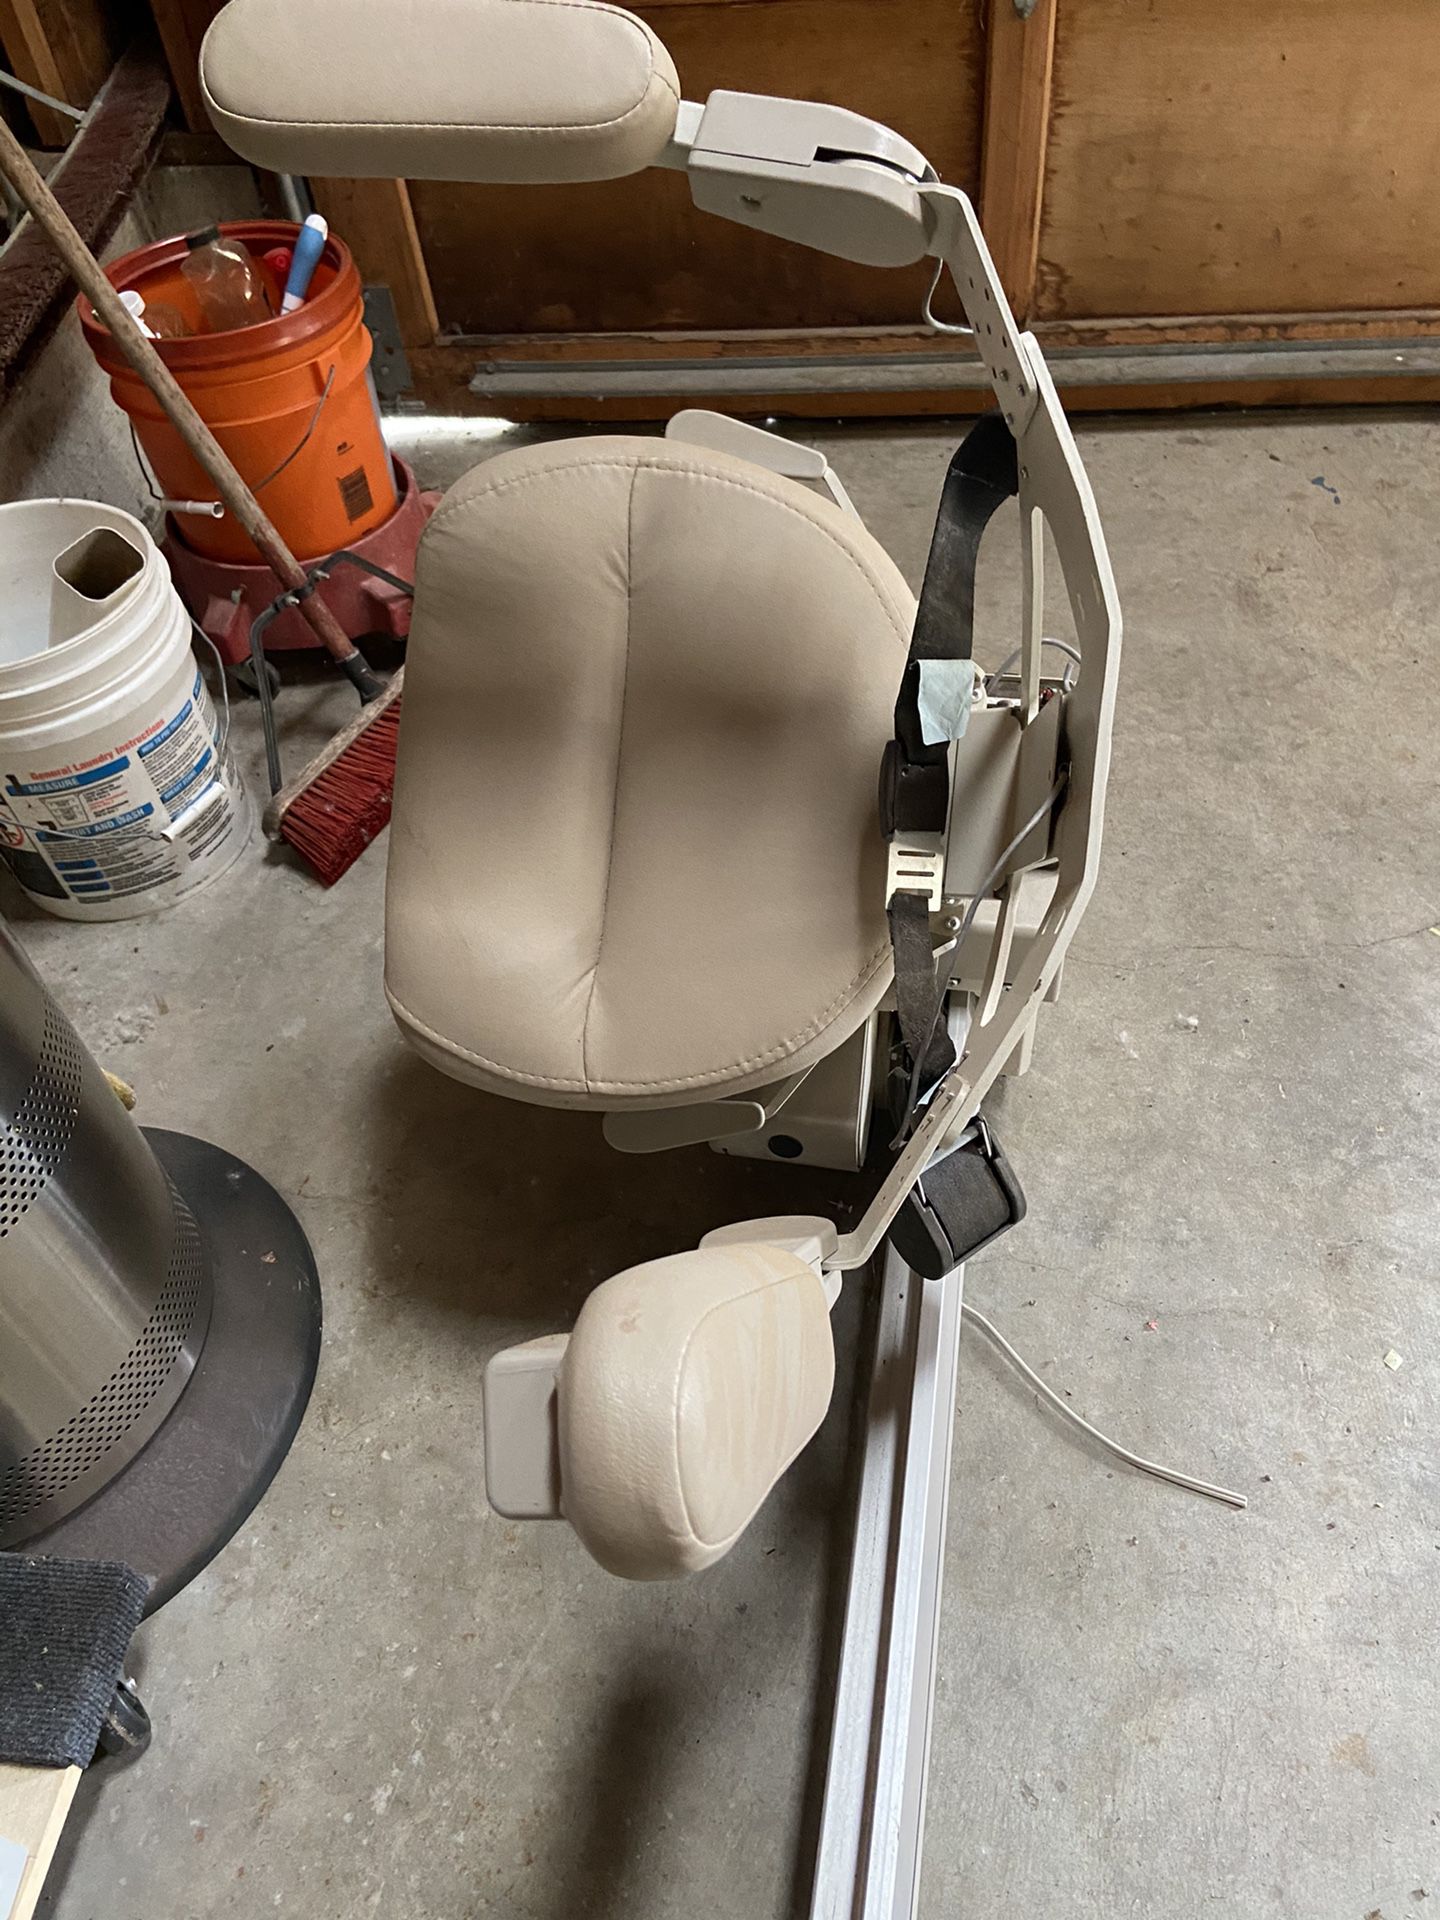 Bruno stair chair lift. We have 2 , one with a slider that you can build in and the other one that you can attach with the slider as well both of the